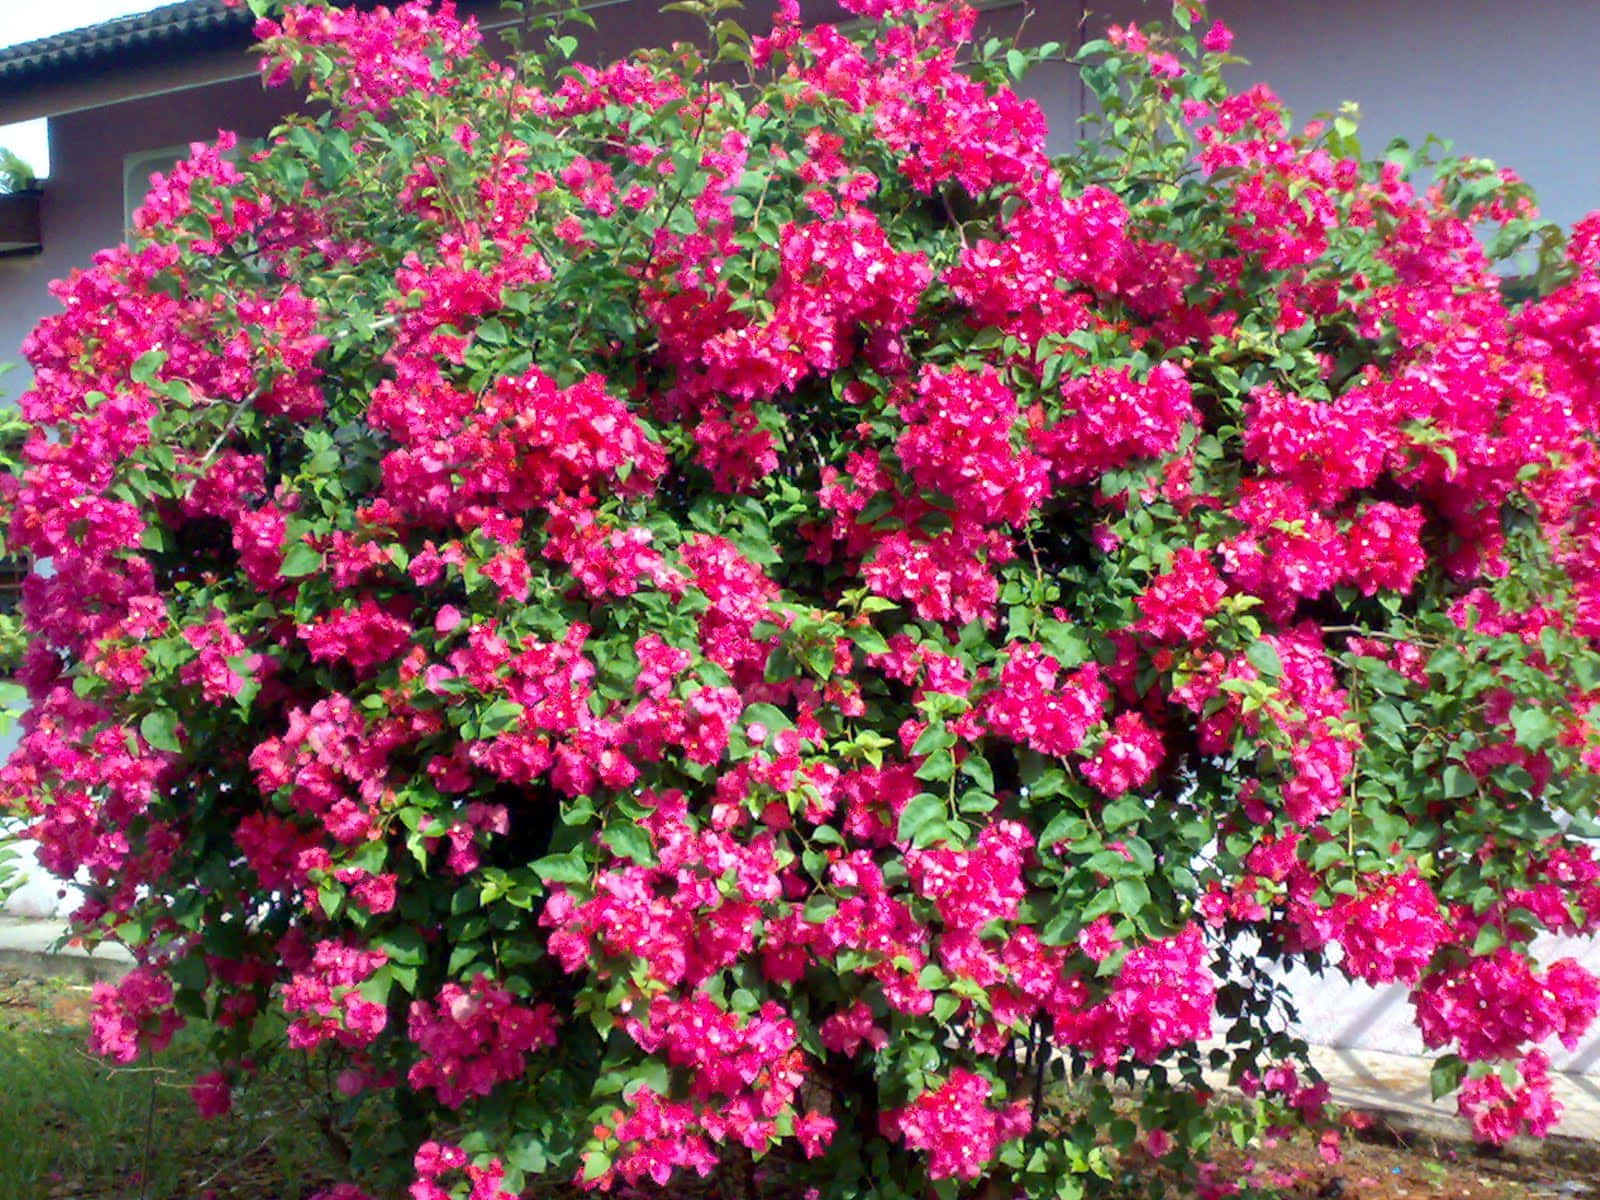 Download A Pink Flowering Bush In Front Of A House | Wallpapers.com